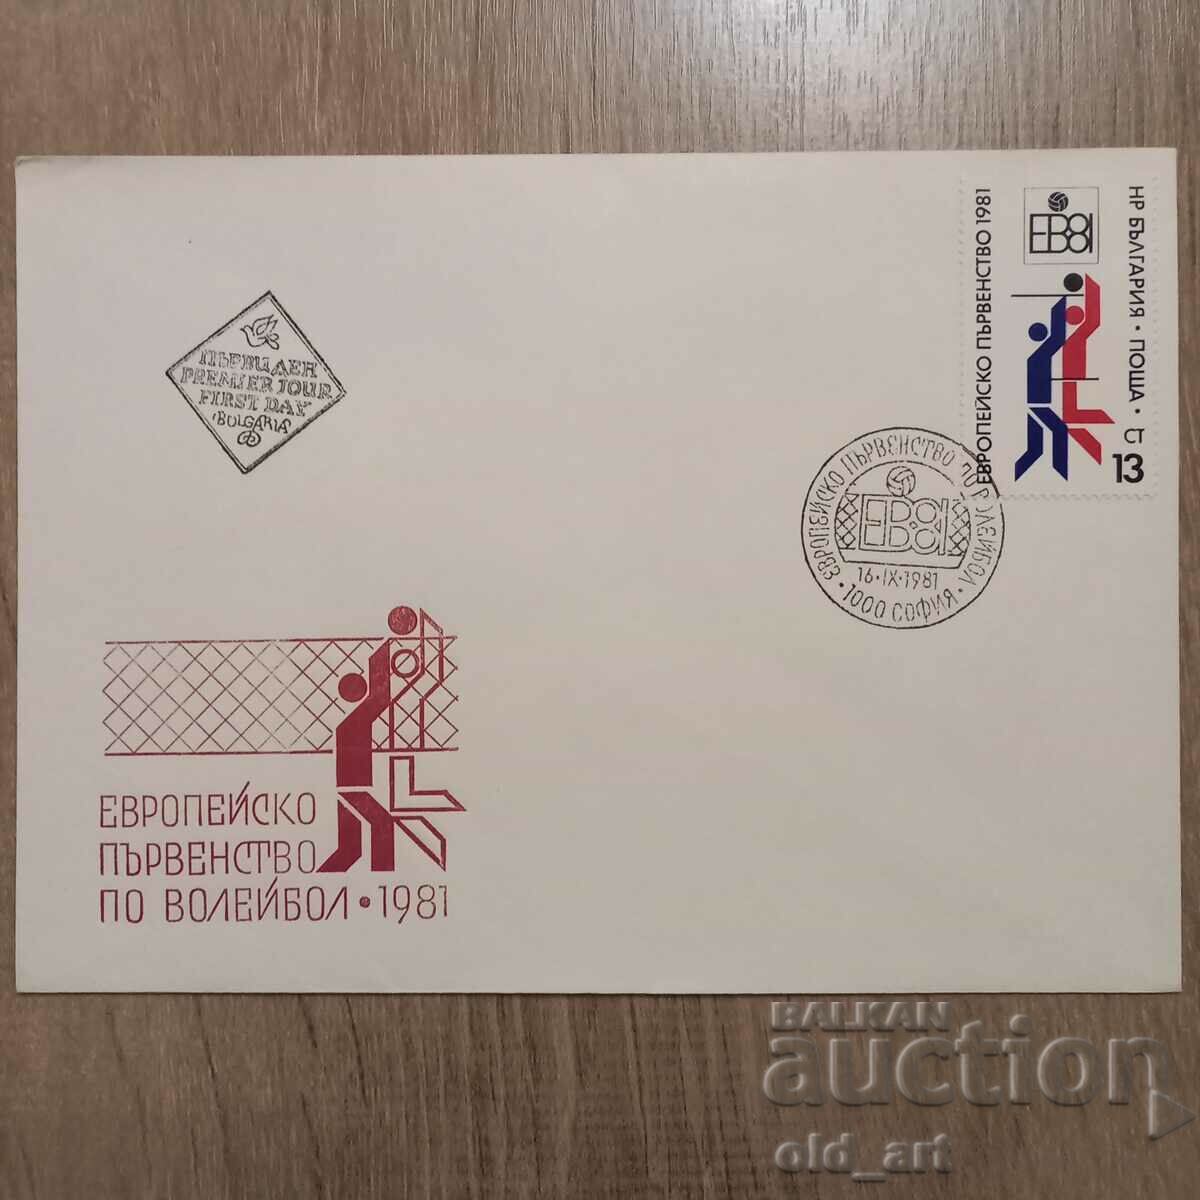 Mailing envelope - European Volleyball Championship 81